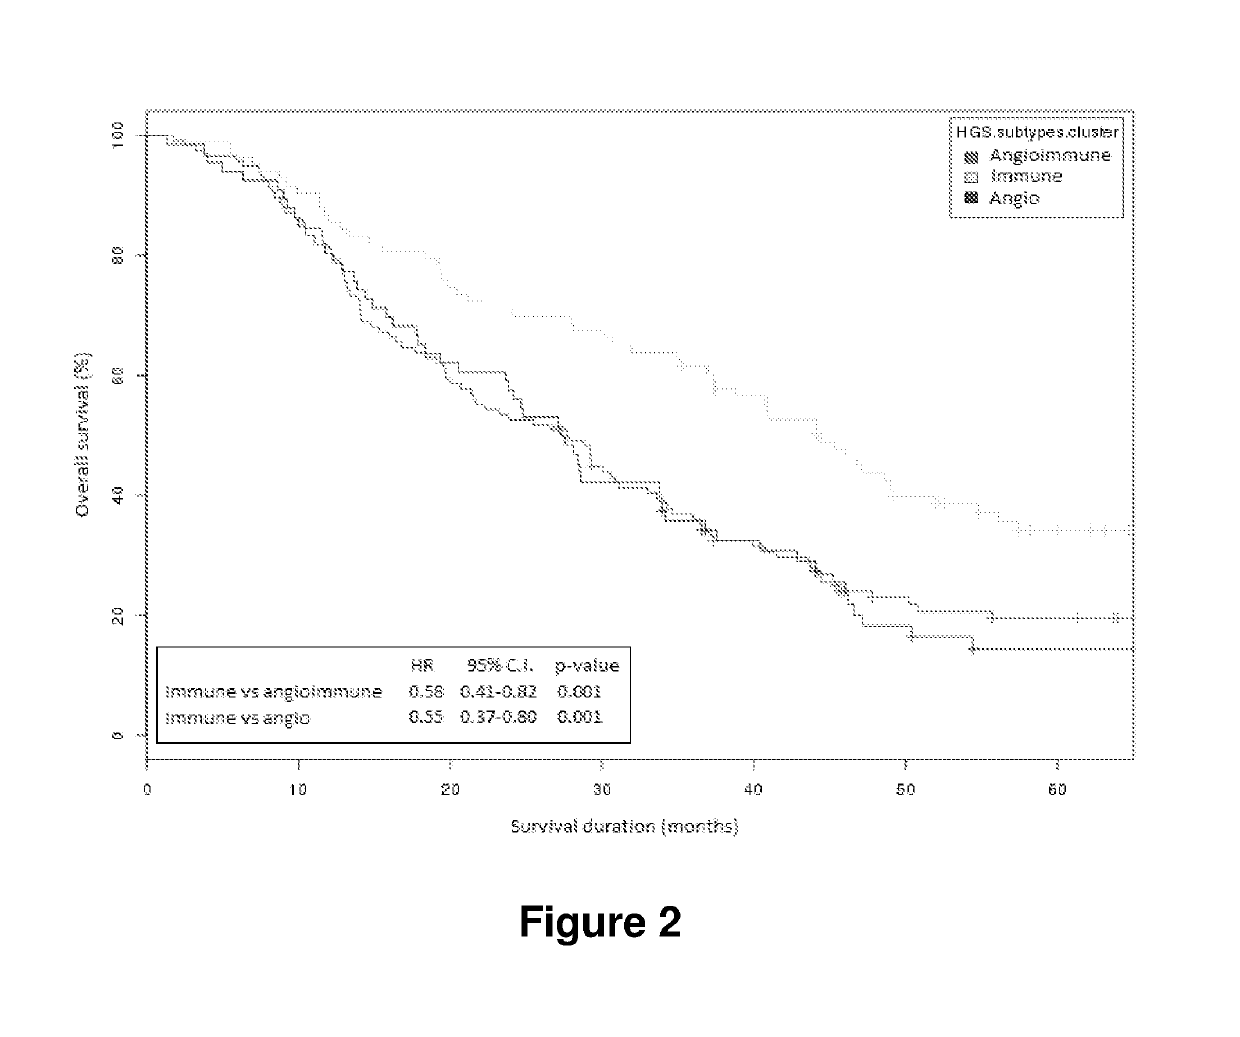 Molecular diagnostic test for predicting response to anti-angiogenic drugs and prognosis of cancer